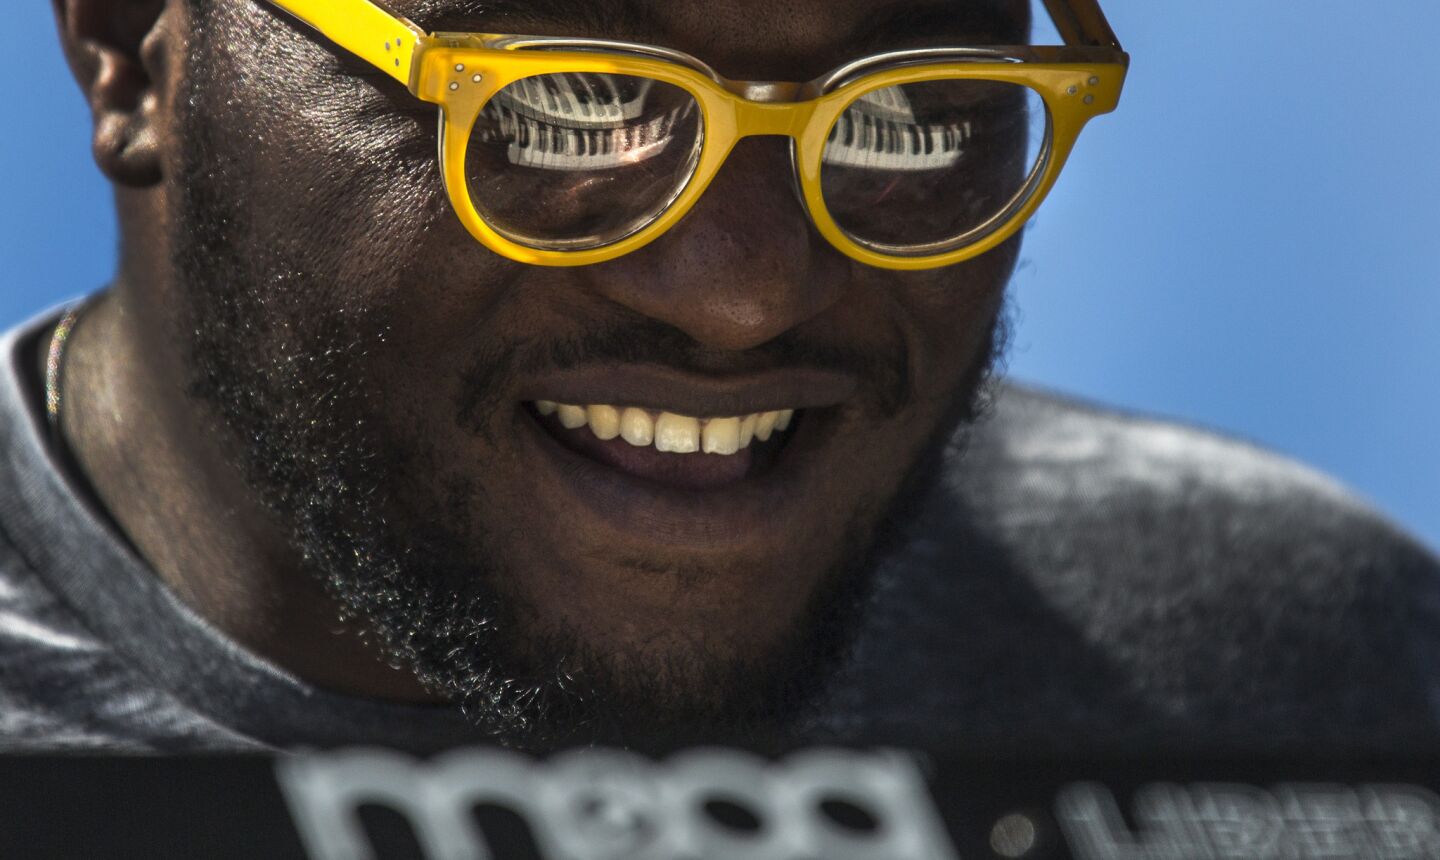 Brandon Coleman's synthesizer keys are reflected in his sunglasses as he performs with Kamasi Washington at the Outdoor Theatre at Coachella.